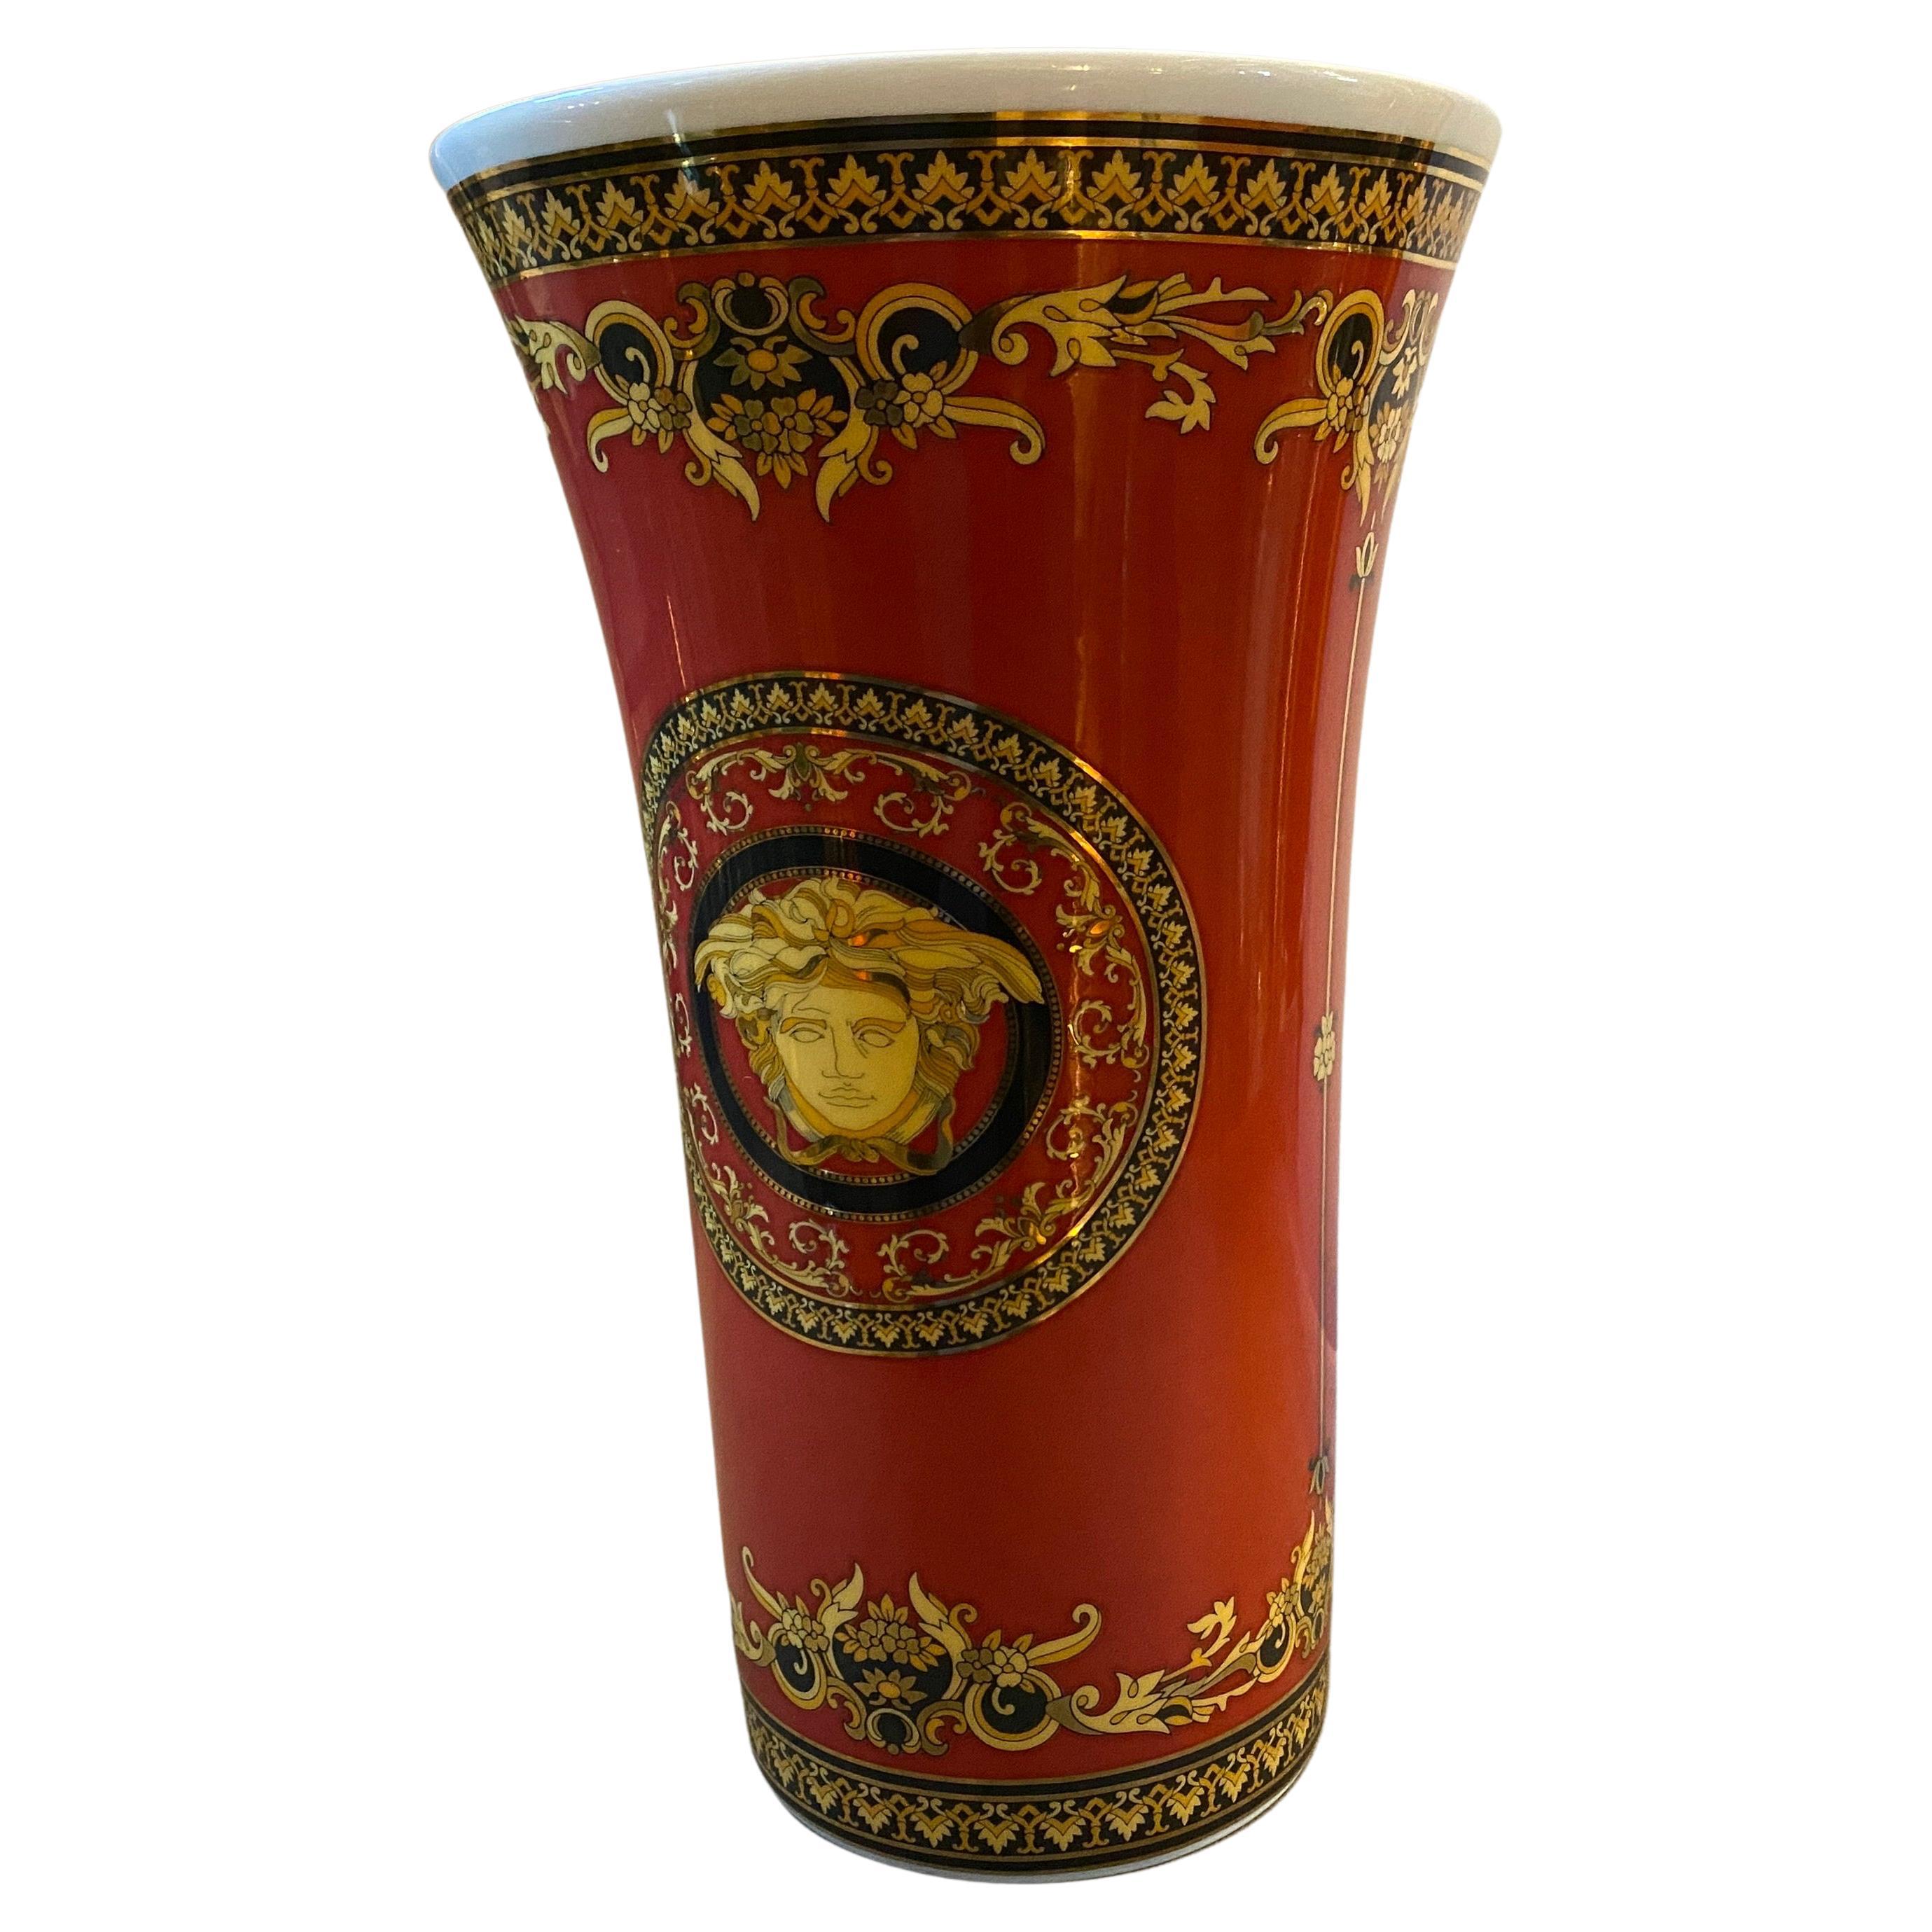 A red and gold porcelain vase designed by Gianni Versace and manufactured by Rosenthal in the Nineties. It's in perfect conditions, probably never used. The Medusa it's always used by Gianni Versace and also now it's often present in Versace